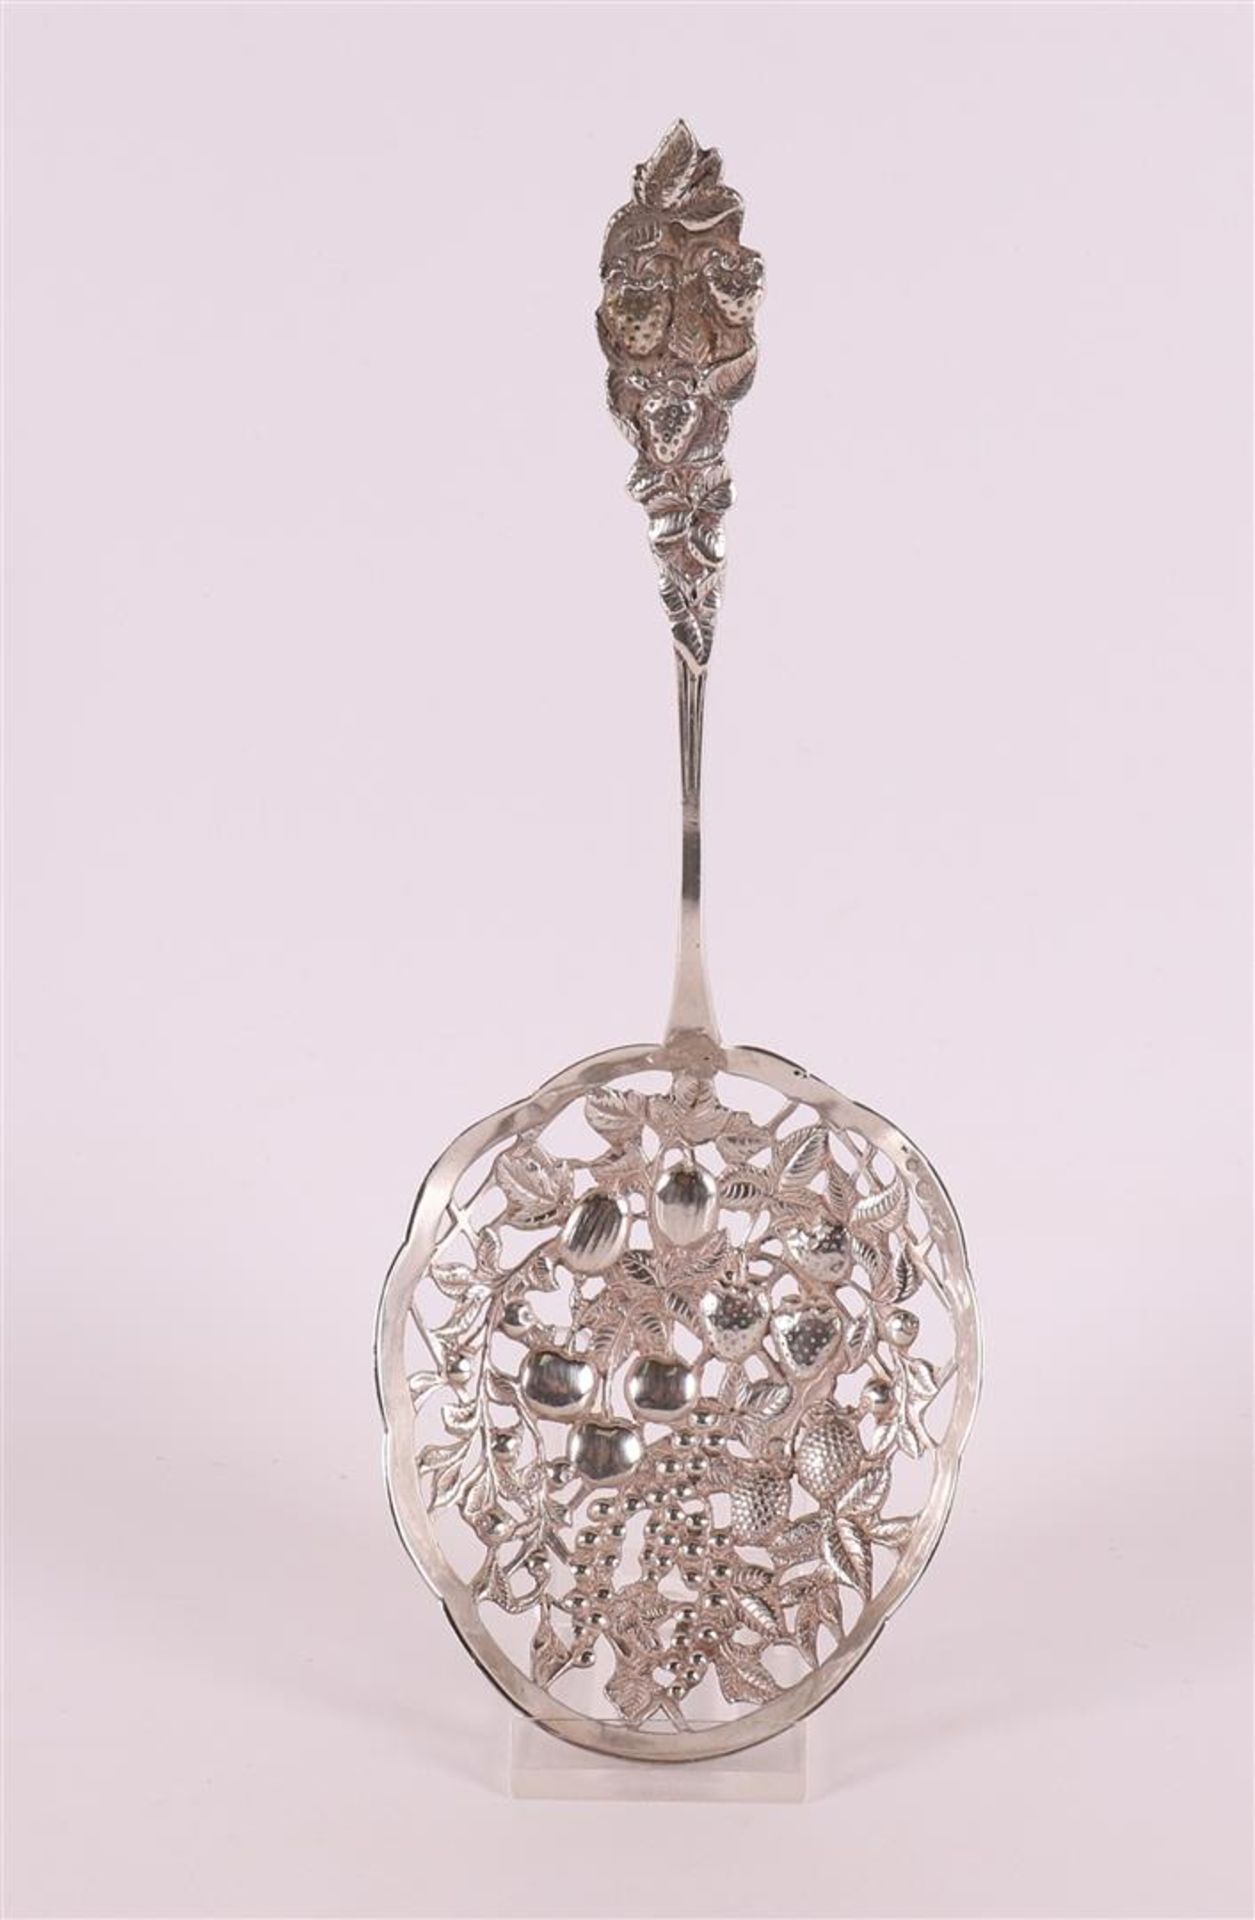 A second grade silver sugar sprinkle spoon, floral decoration, year stamp 1937.